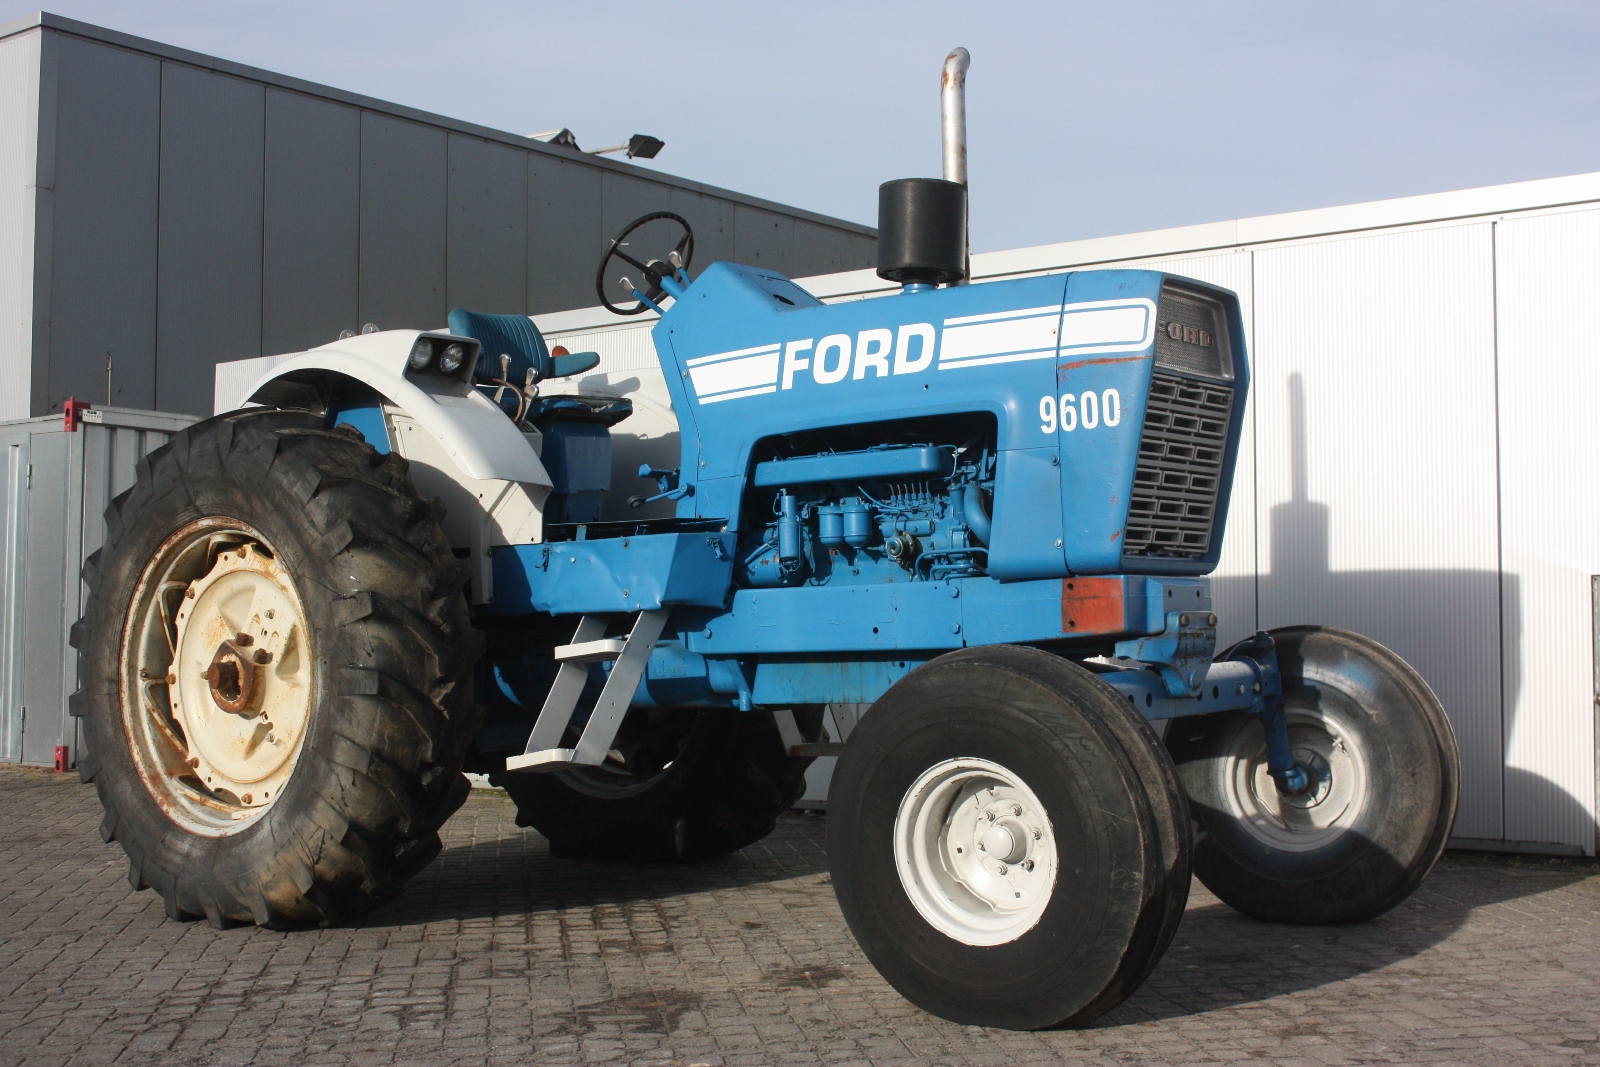 Ford 9600 Specs Ford 9600 Tractor Photos Ford 9600 Pictures to pin on ...